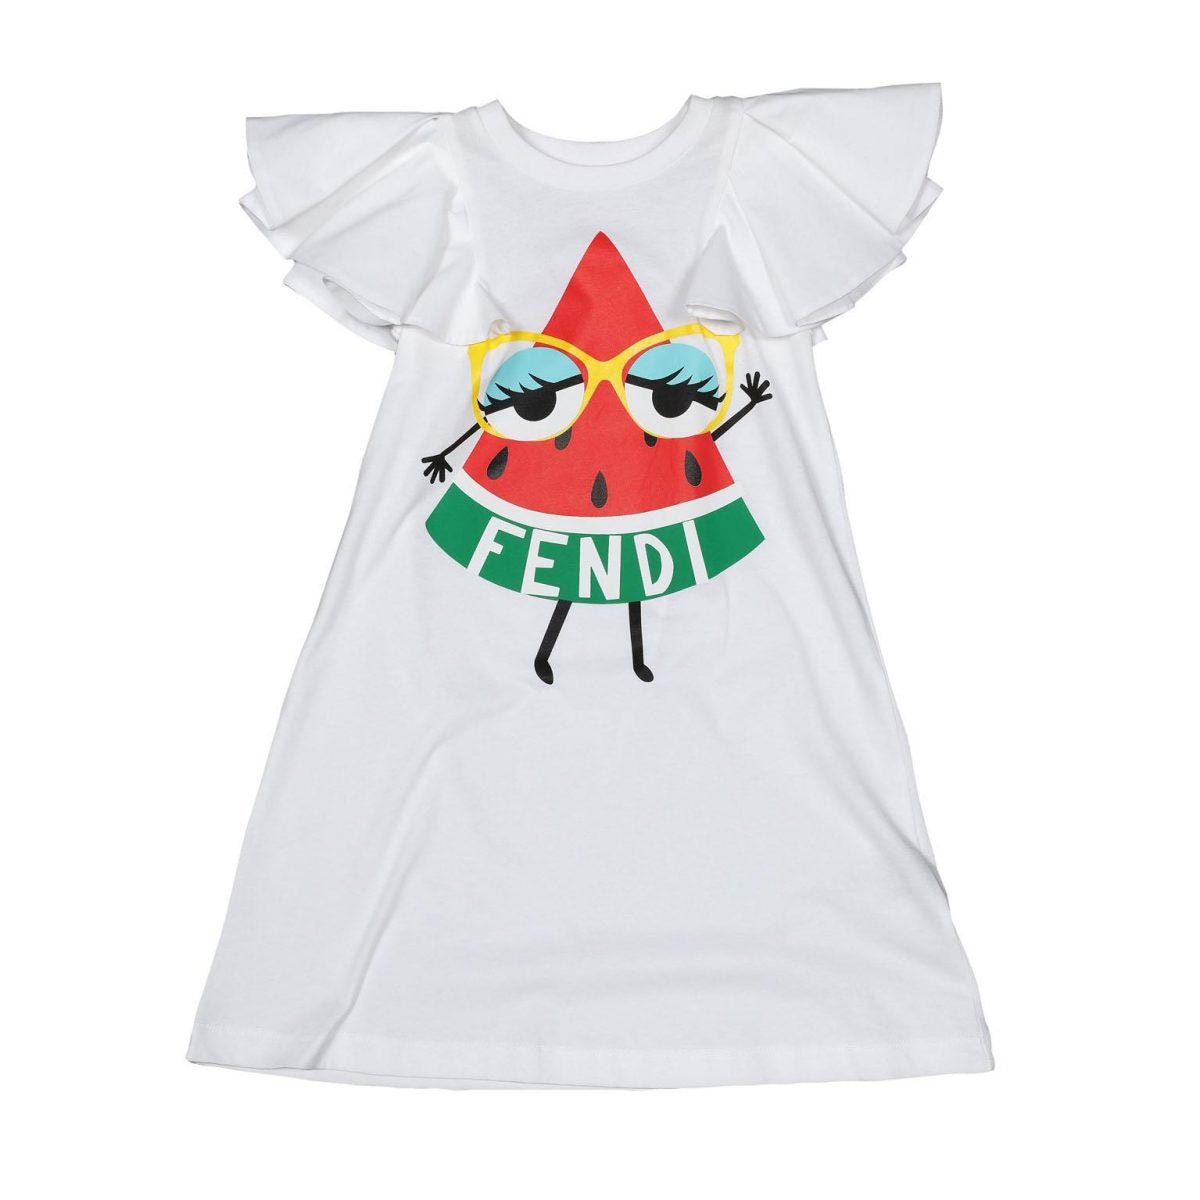 Watermelon Dress in Jersey with logo